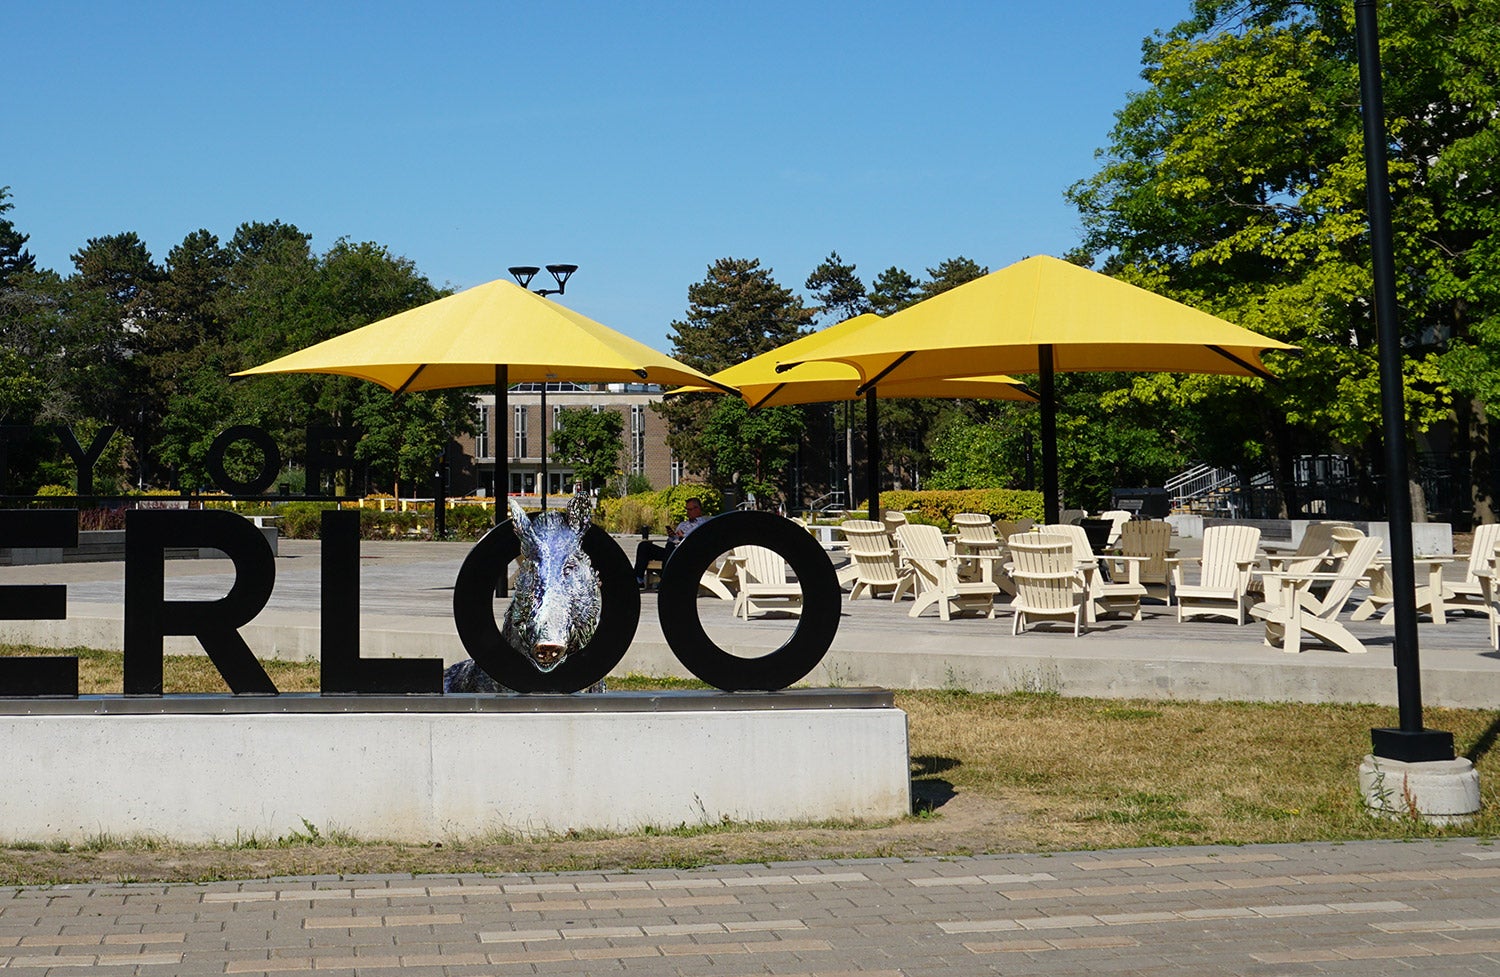 Porcellino sticks his head through the "o" in the Waterloo sign. The gold umbrella covered seating area in the Quad is in the background